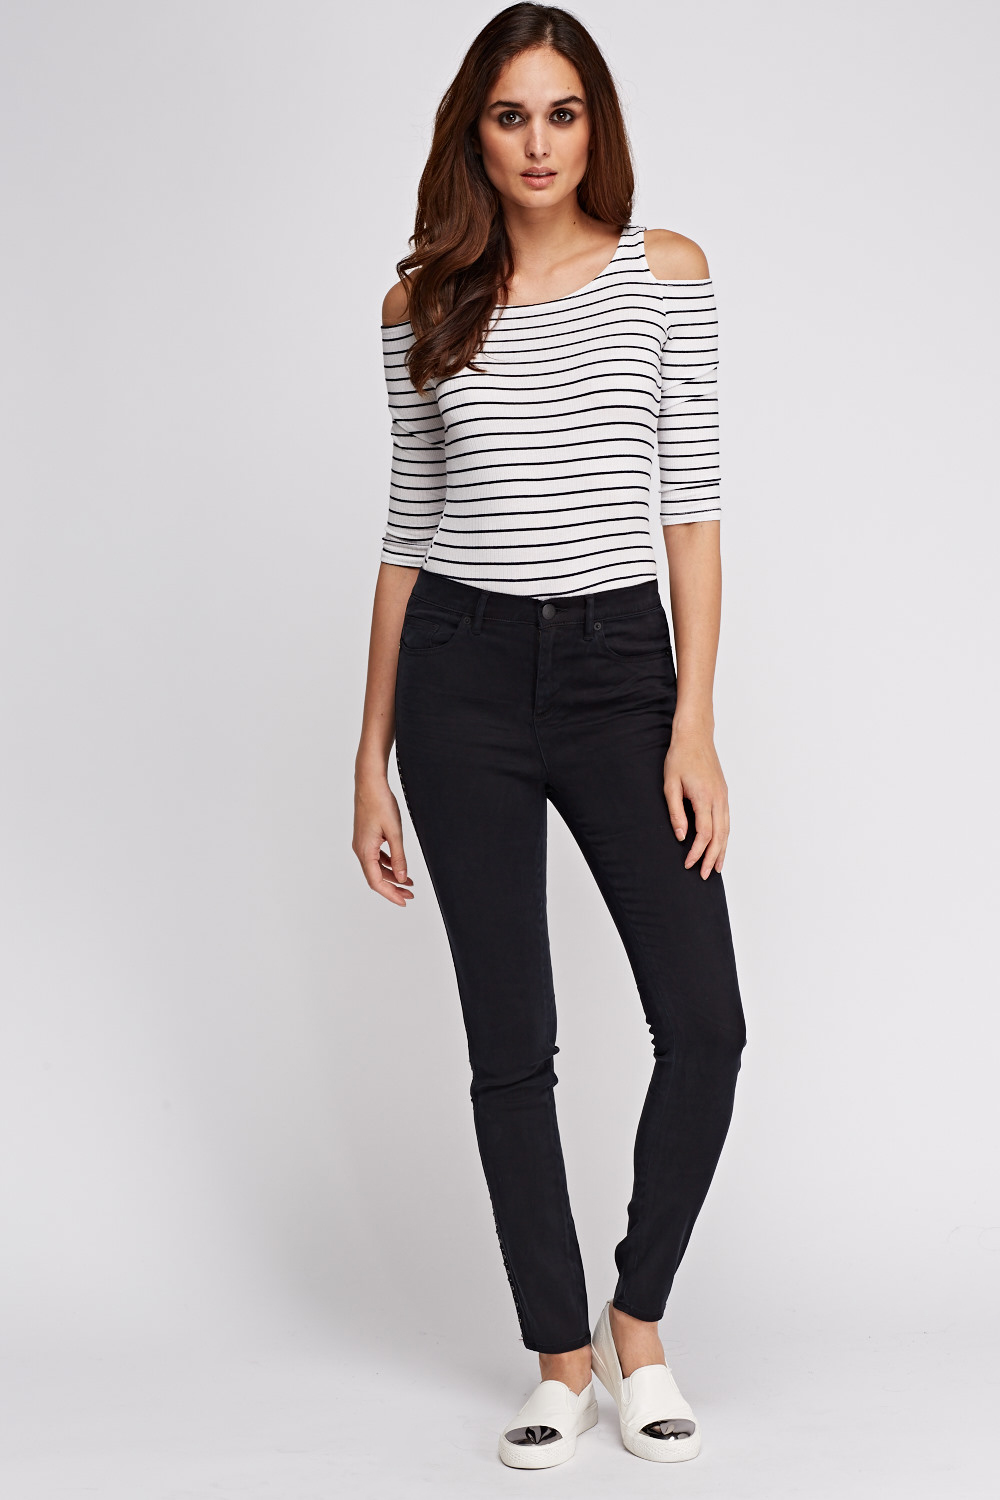 juicy couture skinny jeans